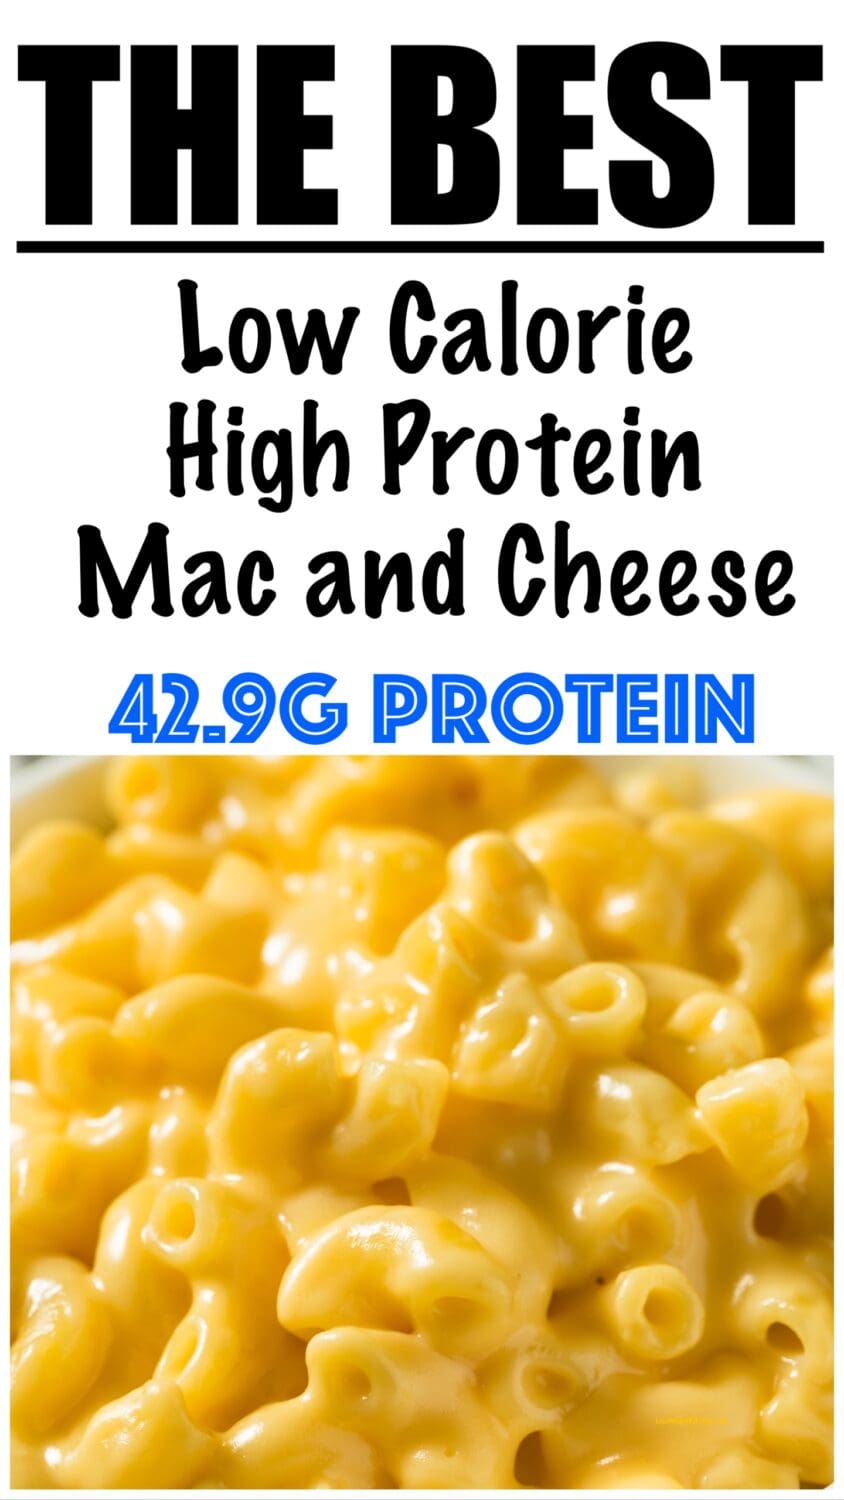 Low Calorie High Protein Mac and Cheese Recipe